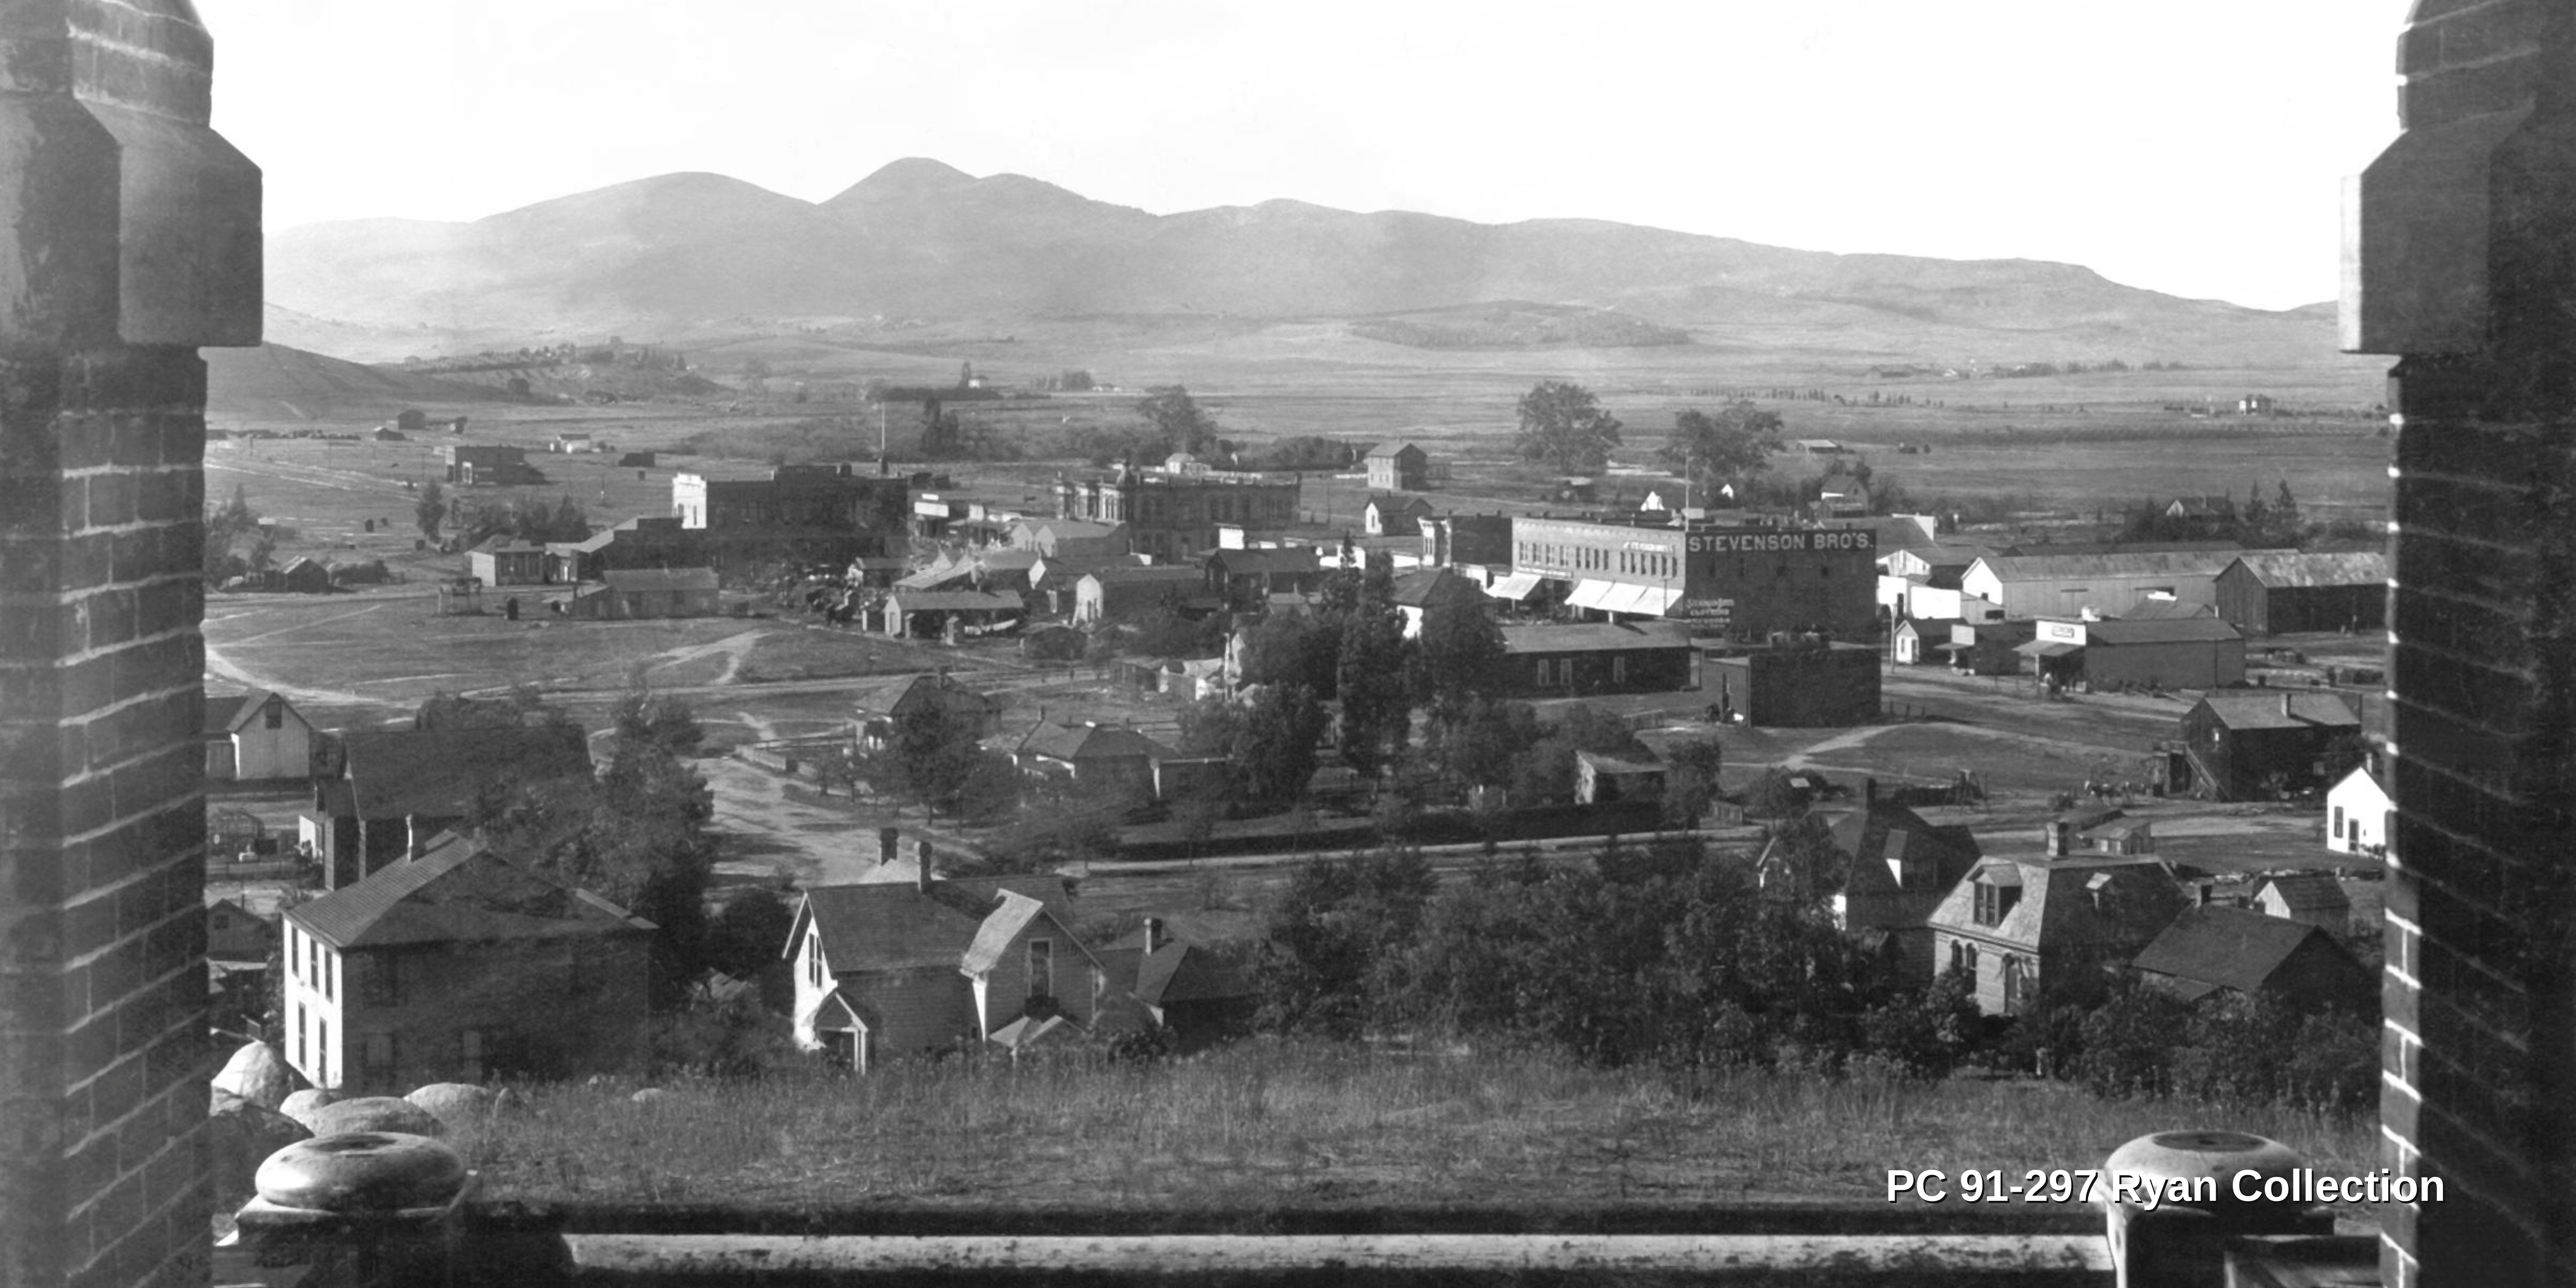 Image of historic Escondido from the Frances Beven Ryan Collection. This black and white photo shows homes and businesses from the balcony of the Escondido High School. There is a view of the mountains in the distance and there are noticeably fewer buildings compared to today's Escondido.